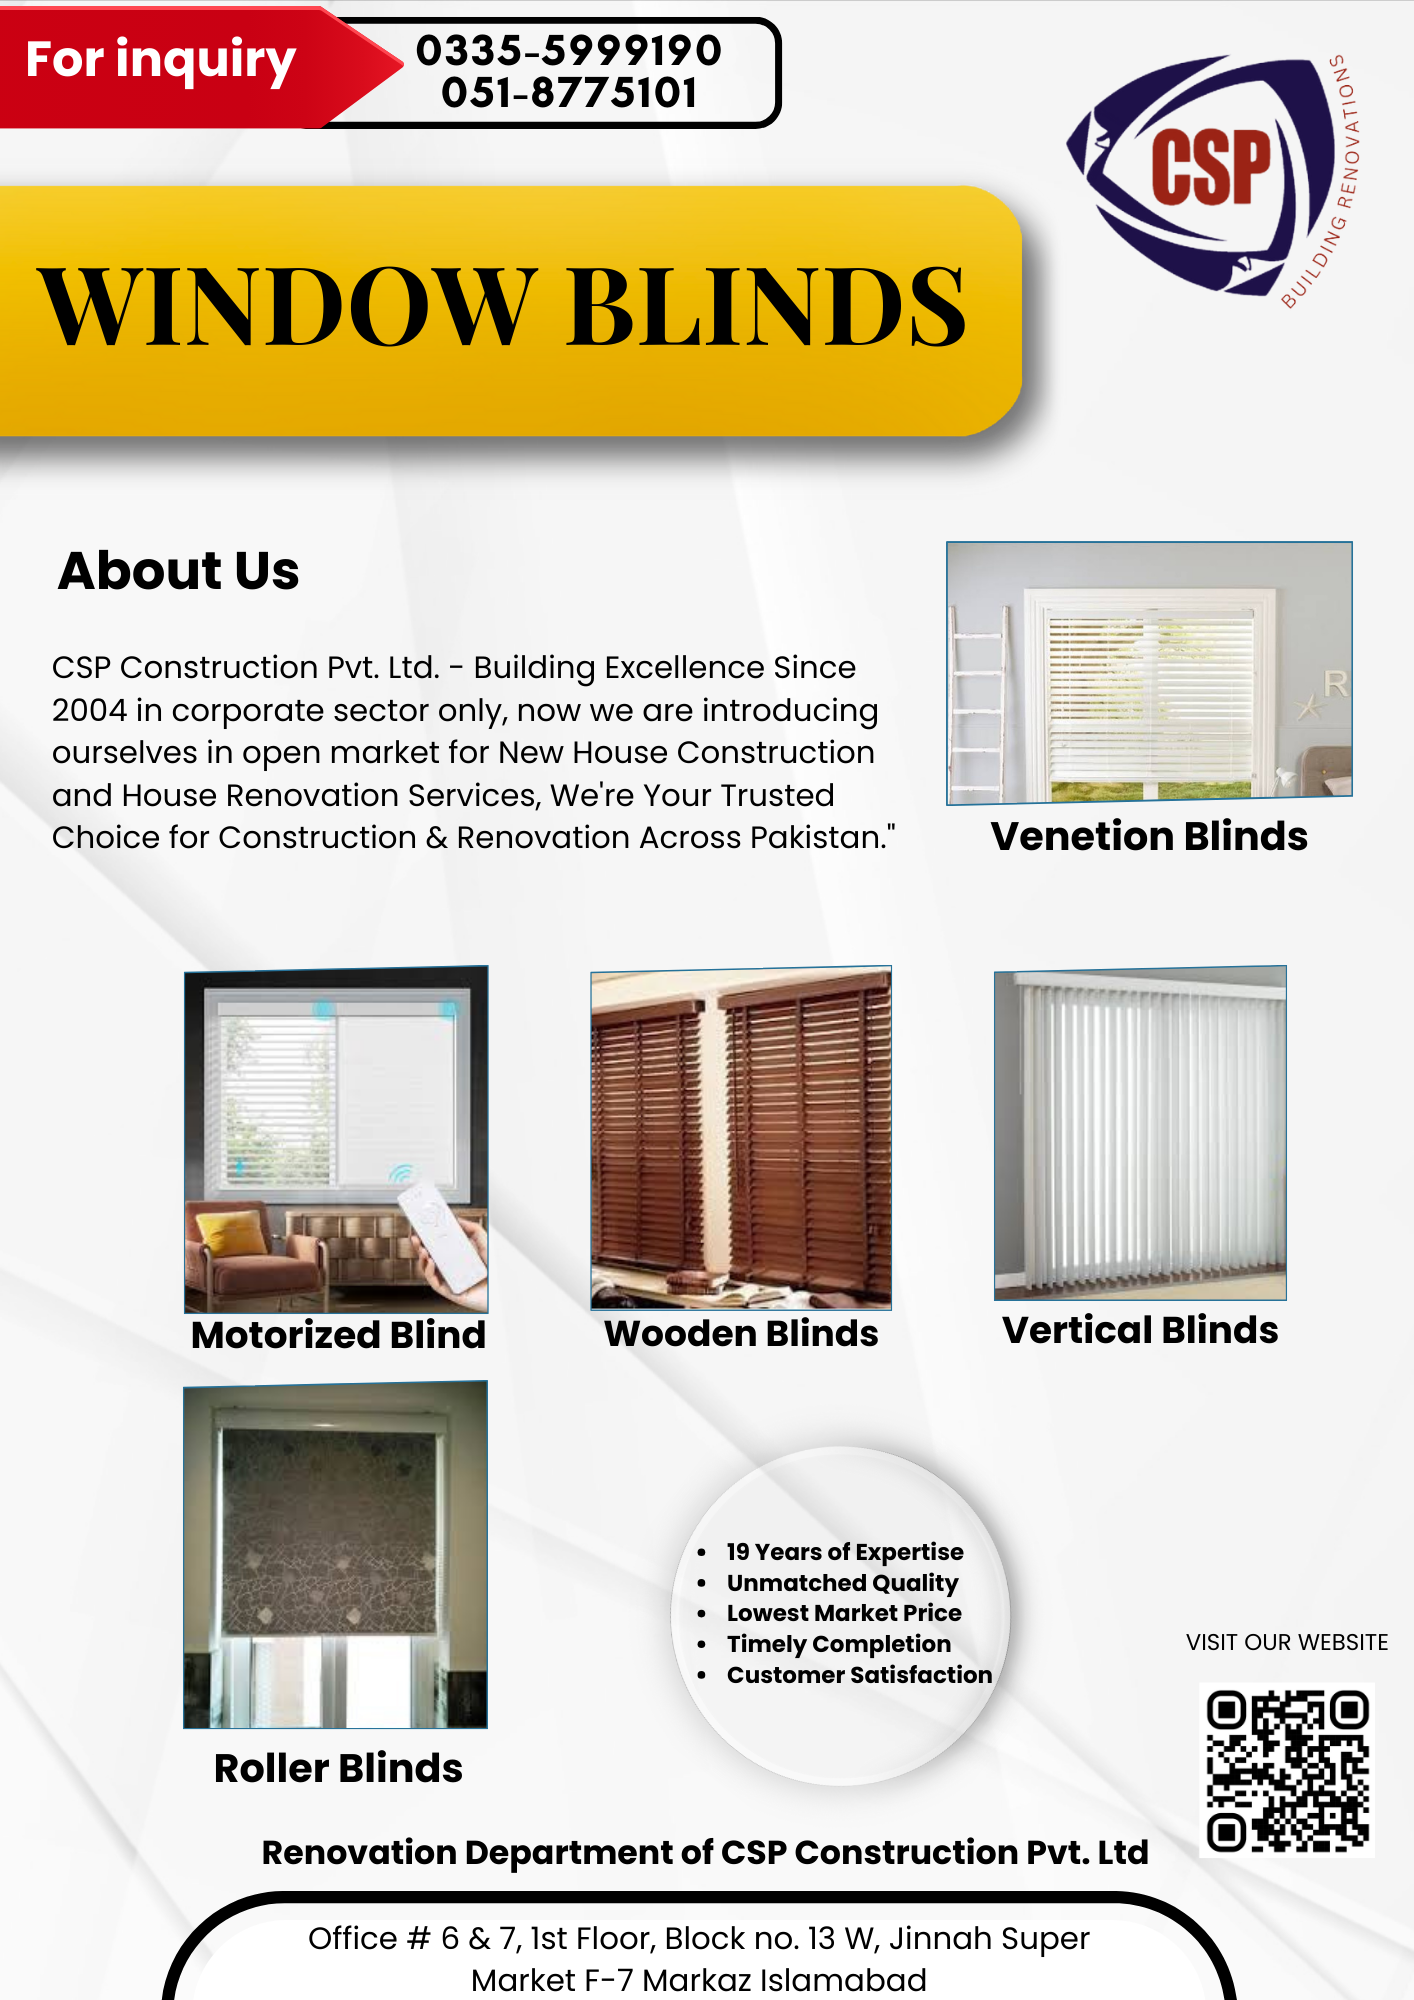 images/services/Window_blinds.png